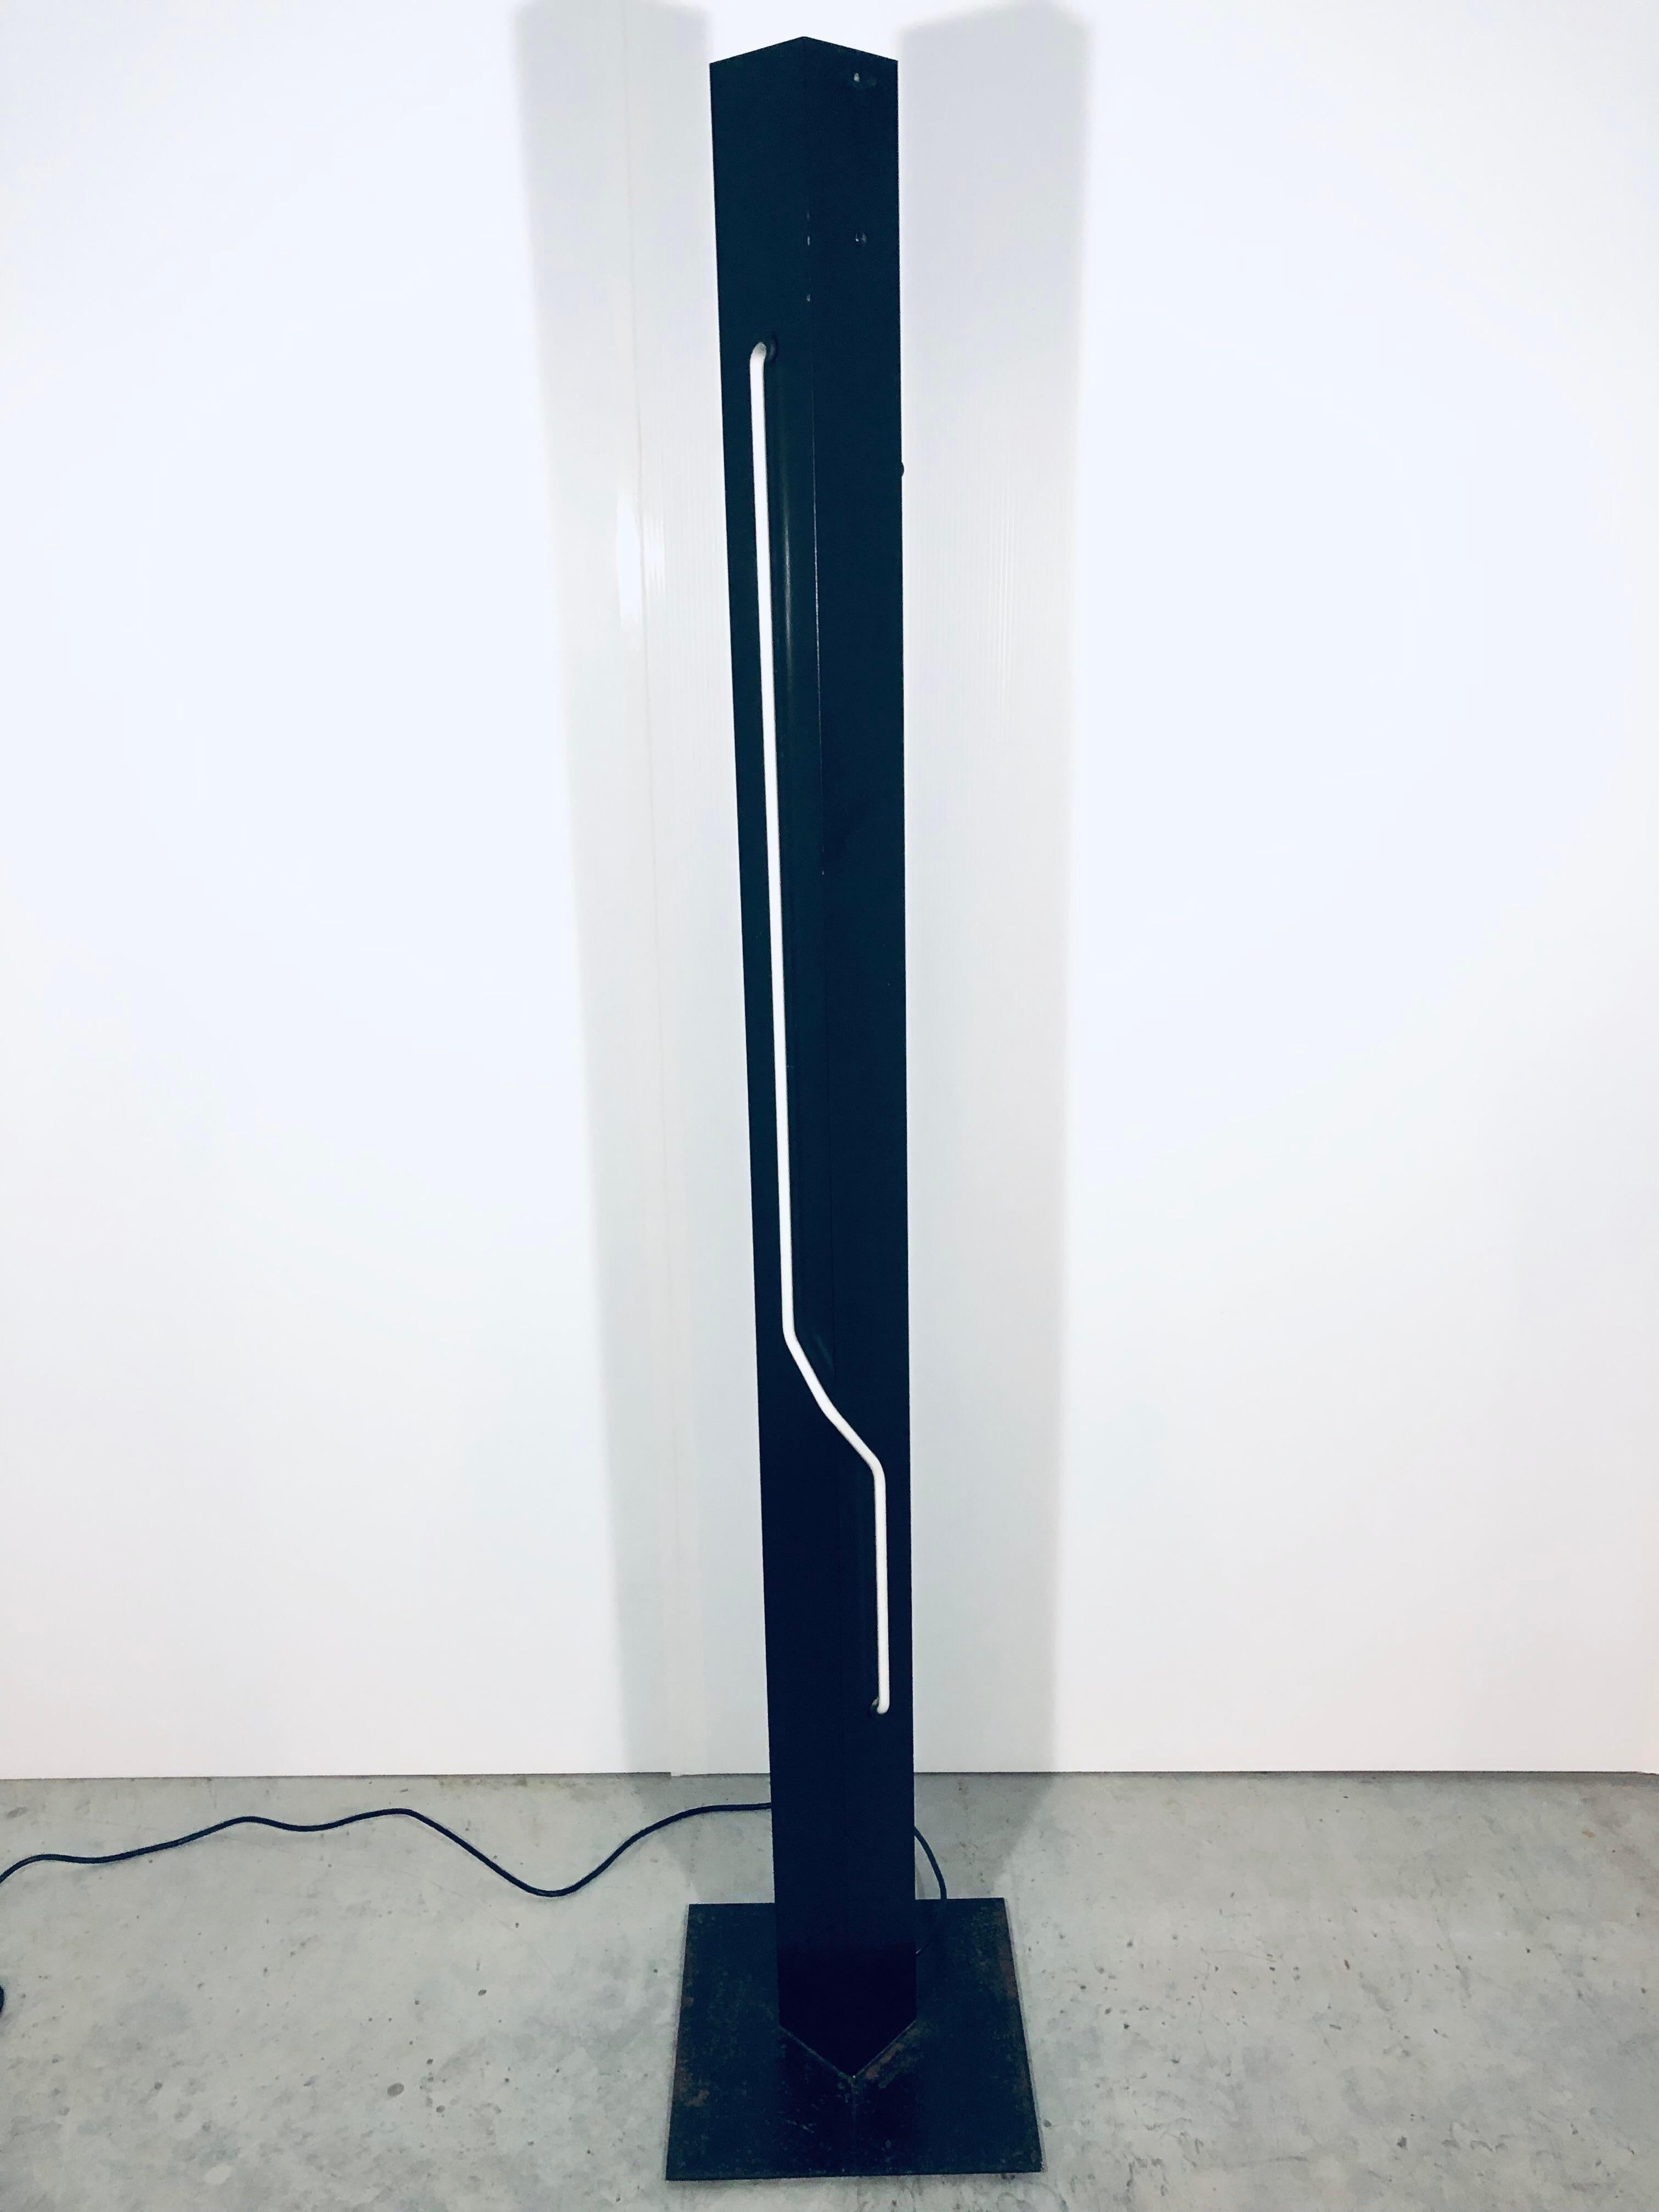 Black tower with white neon and dimmable uplight by Rudi Stern for George Kovacs, 1980s.